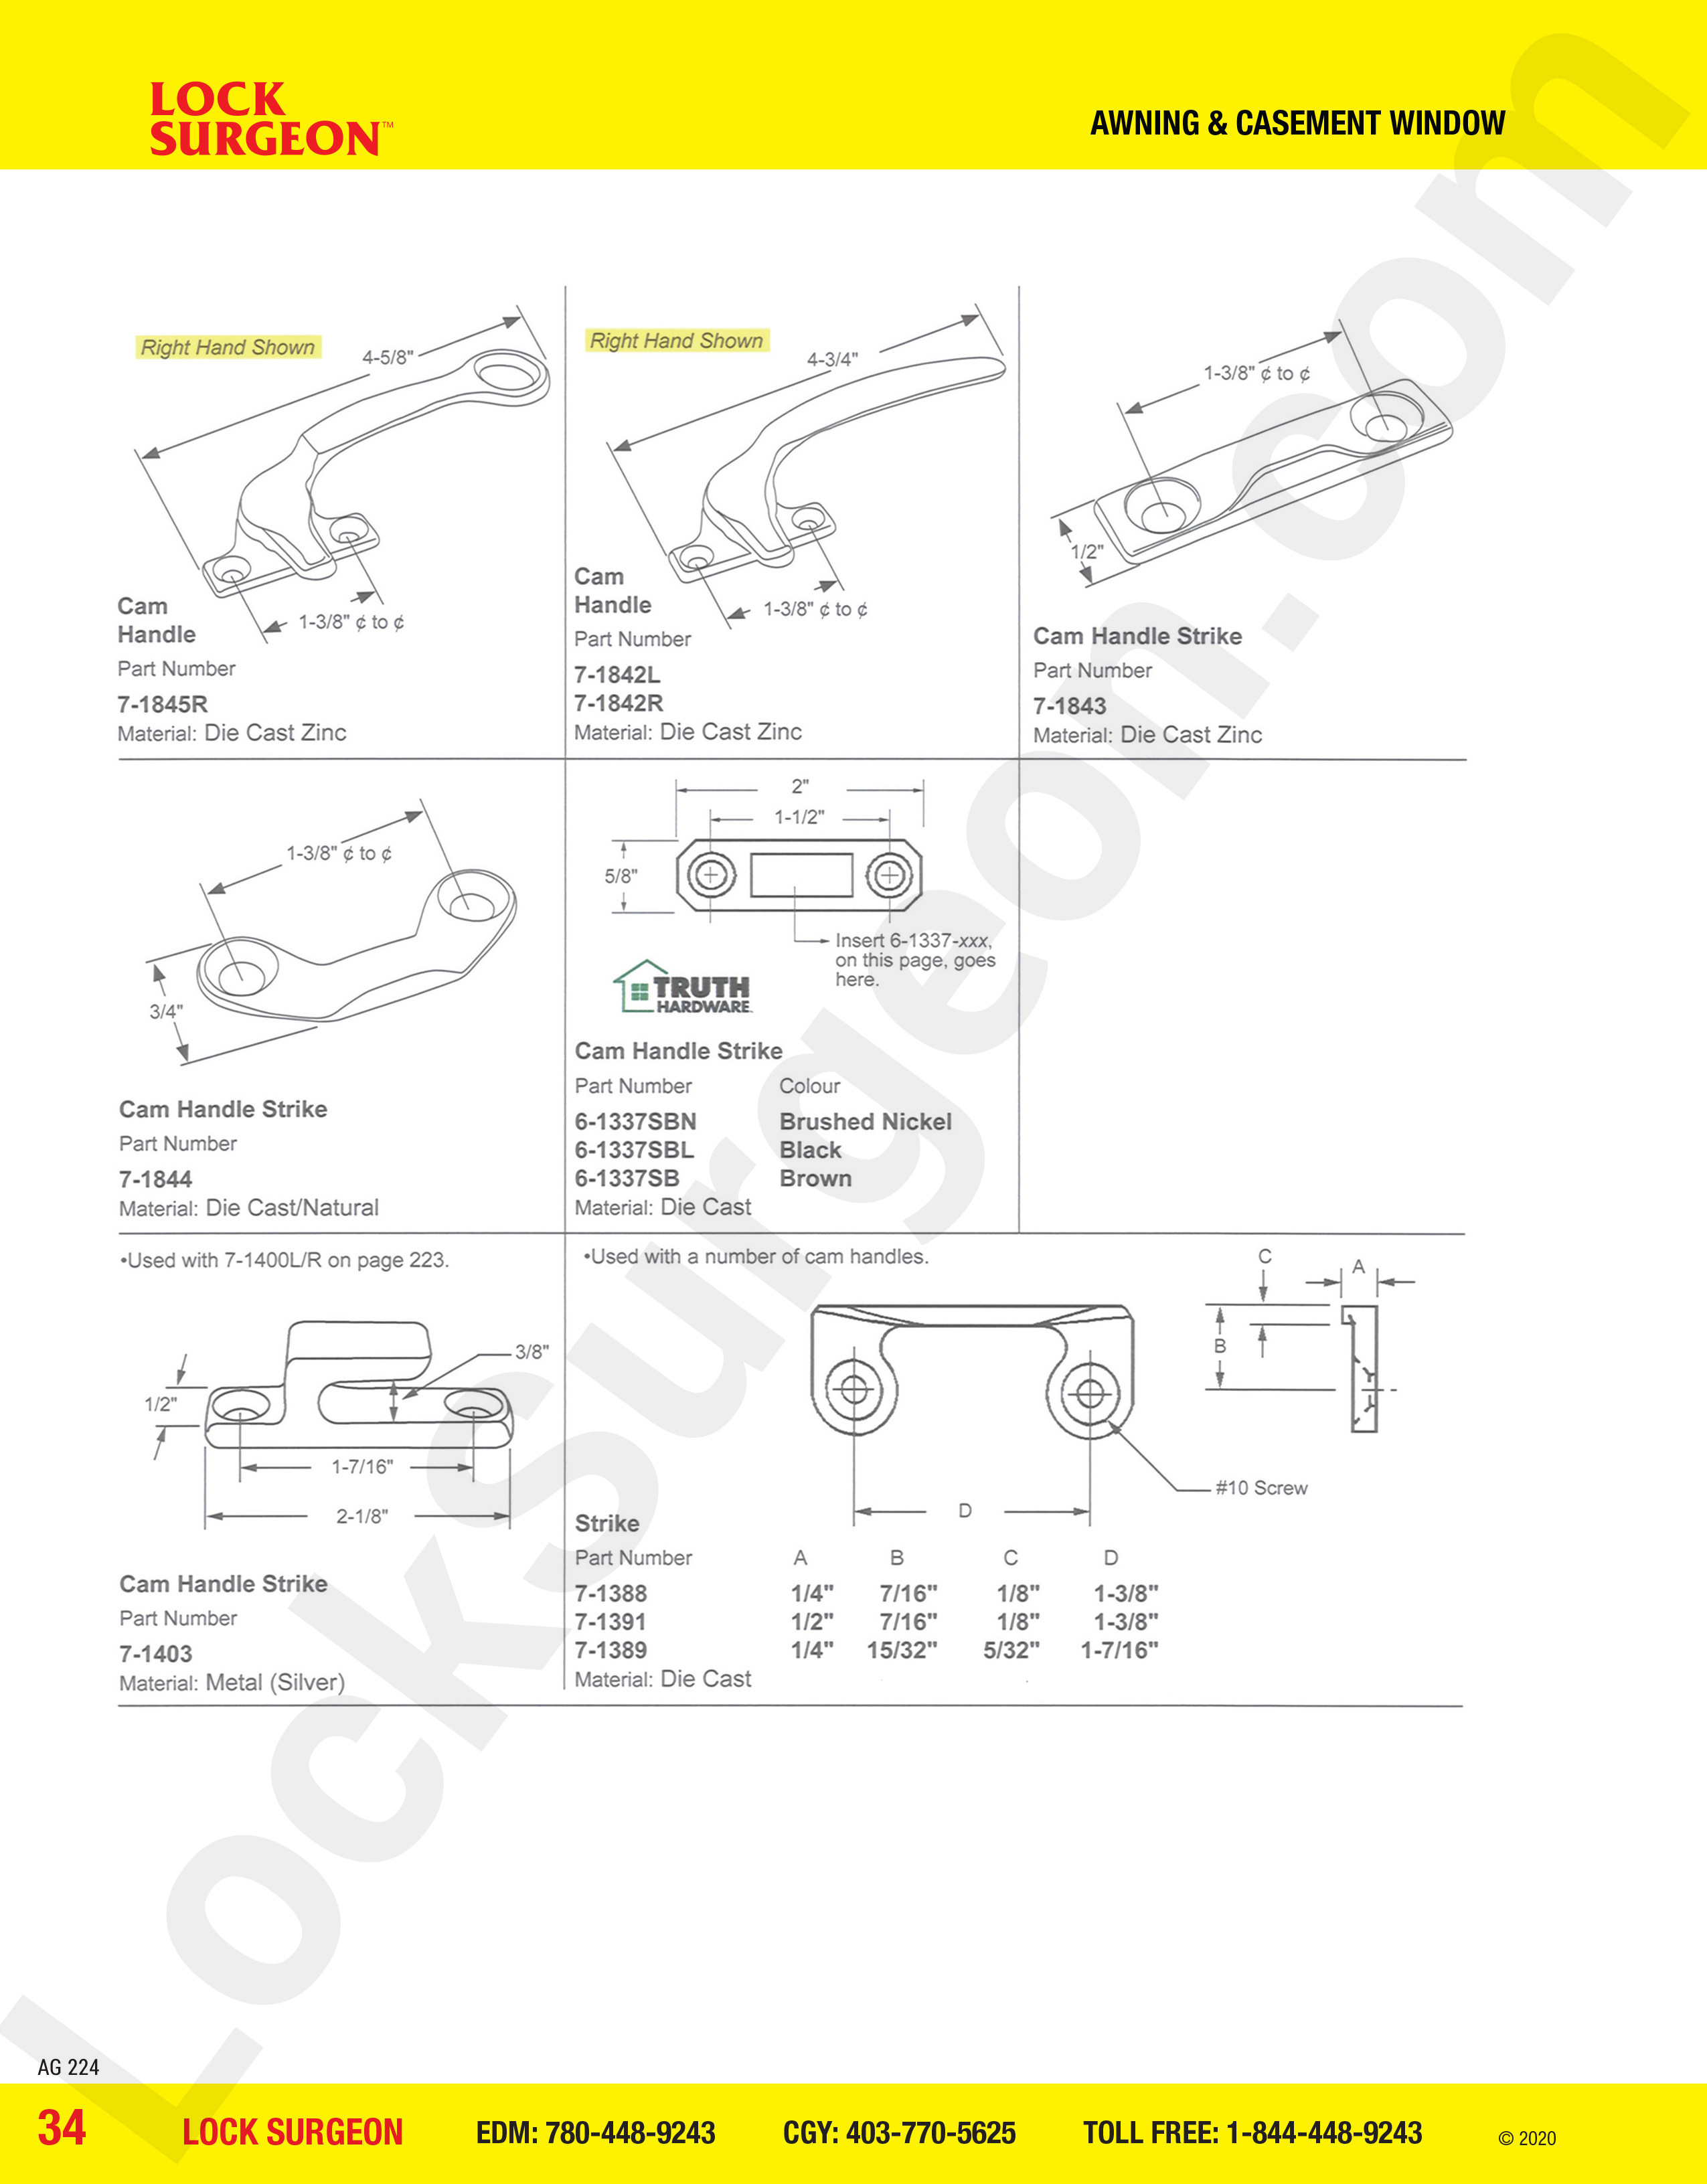 awning and casement window parts for cam handle strikes